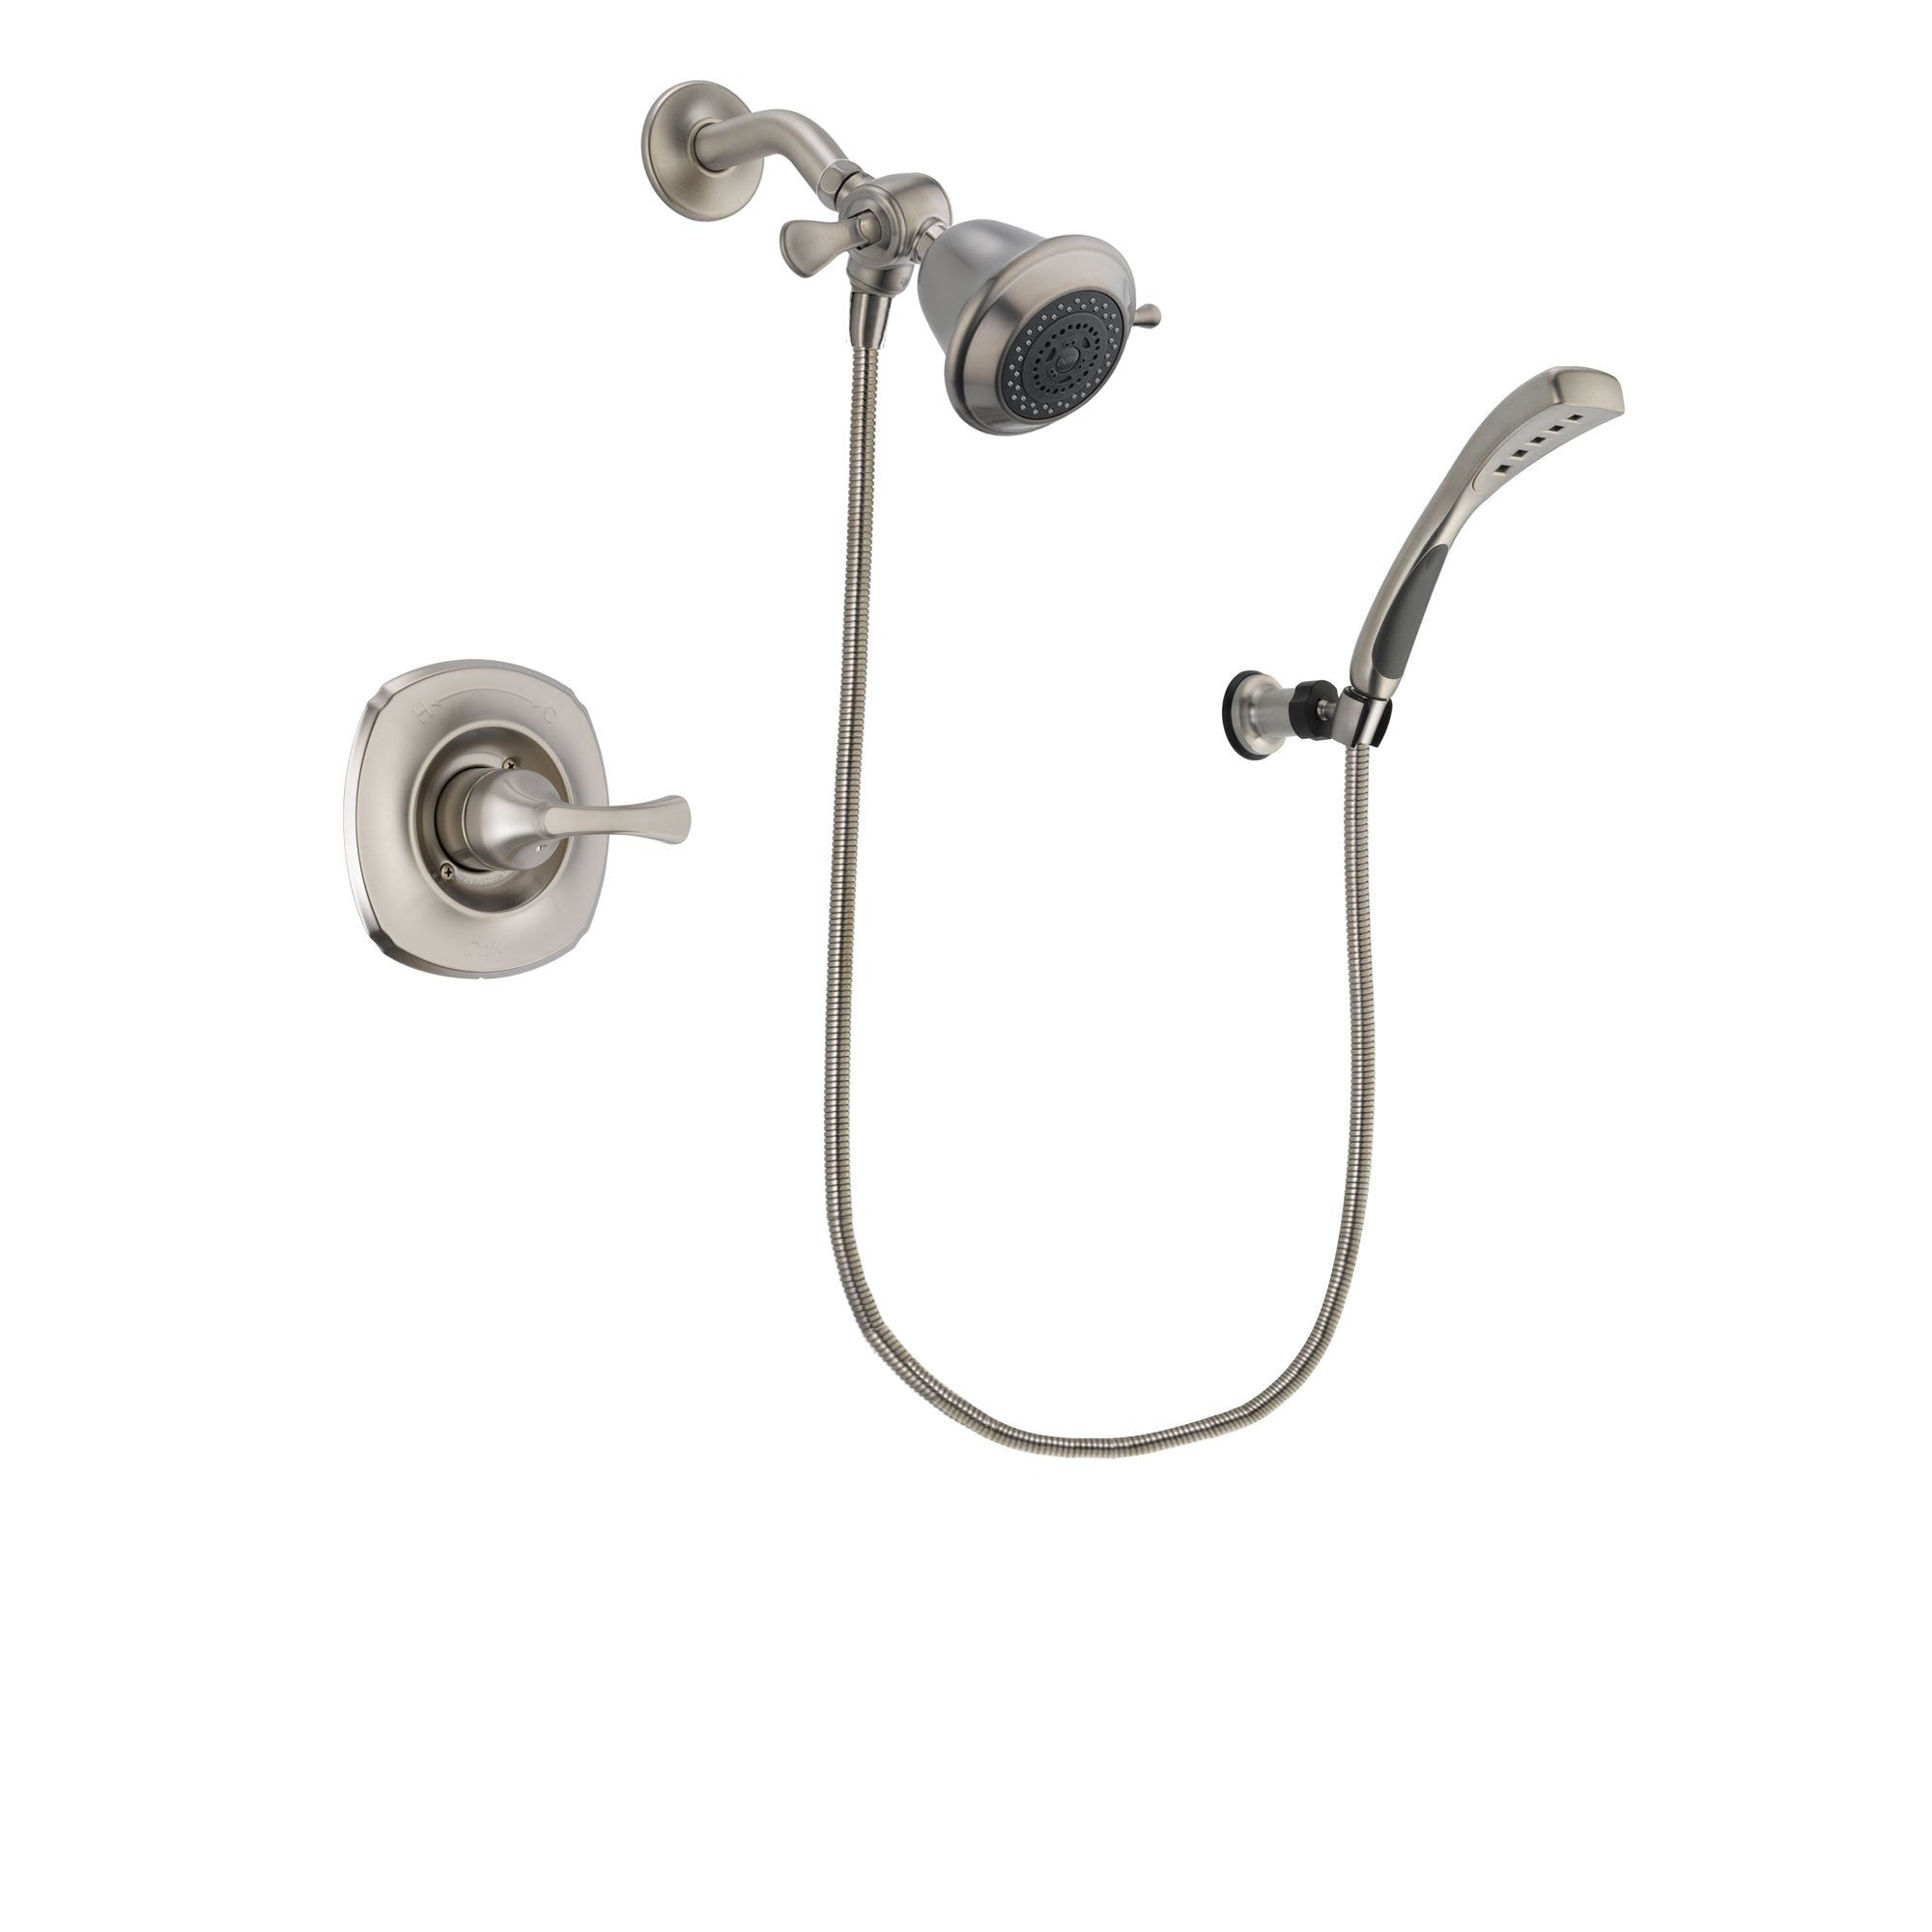 Delta Addison Stainless Steel Finish Shower Faucet System Package with Shower Head and Wall Mounted Handshower Includes Rough-in Valve DSP1802V